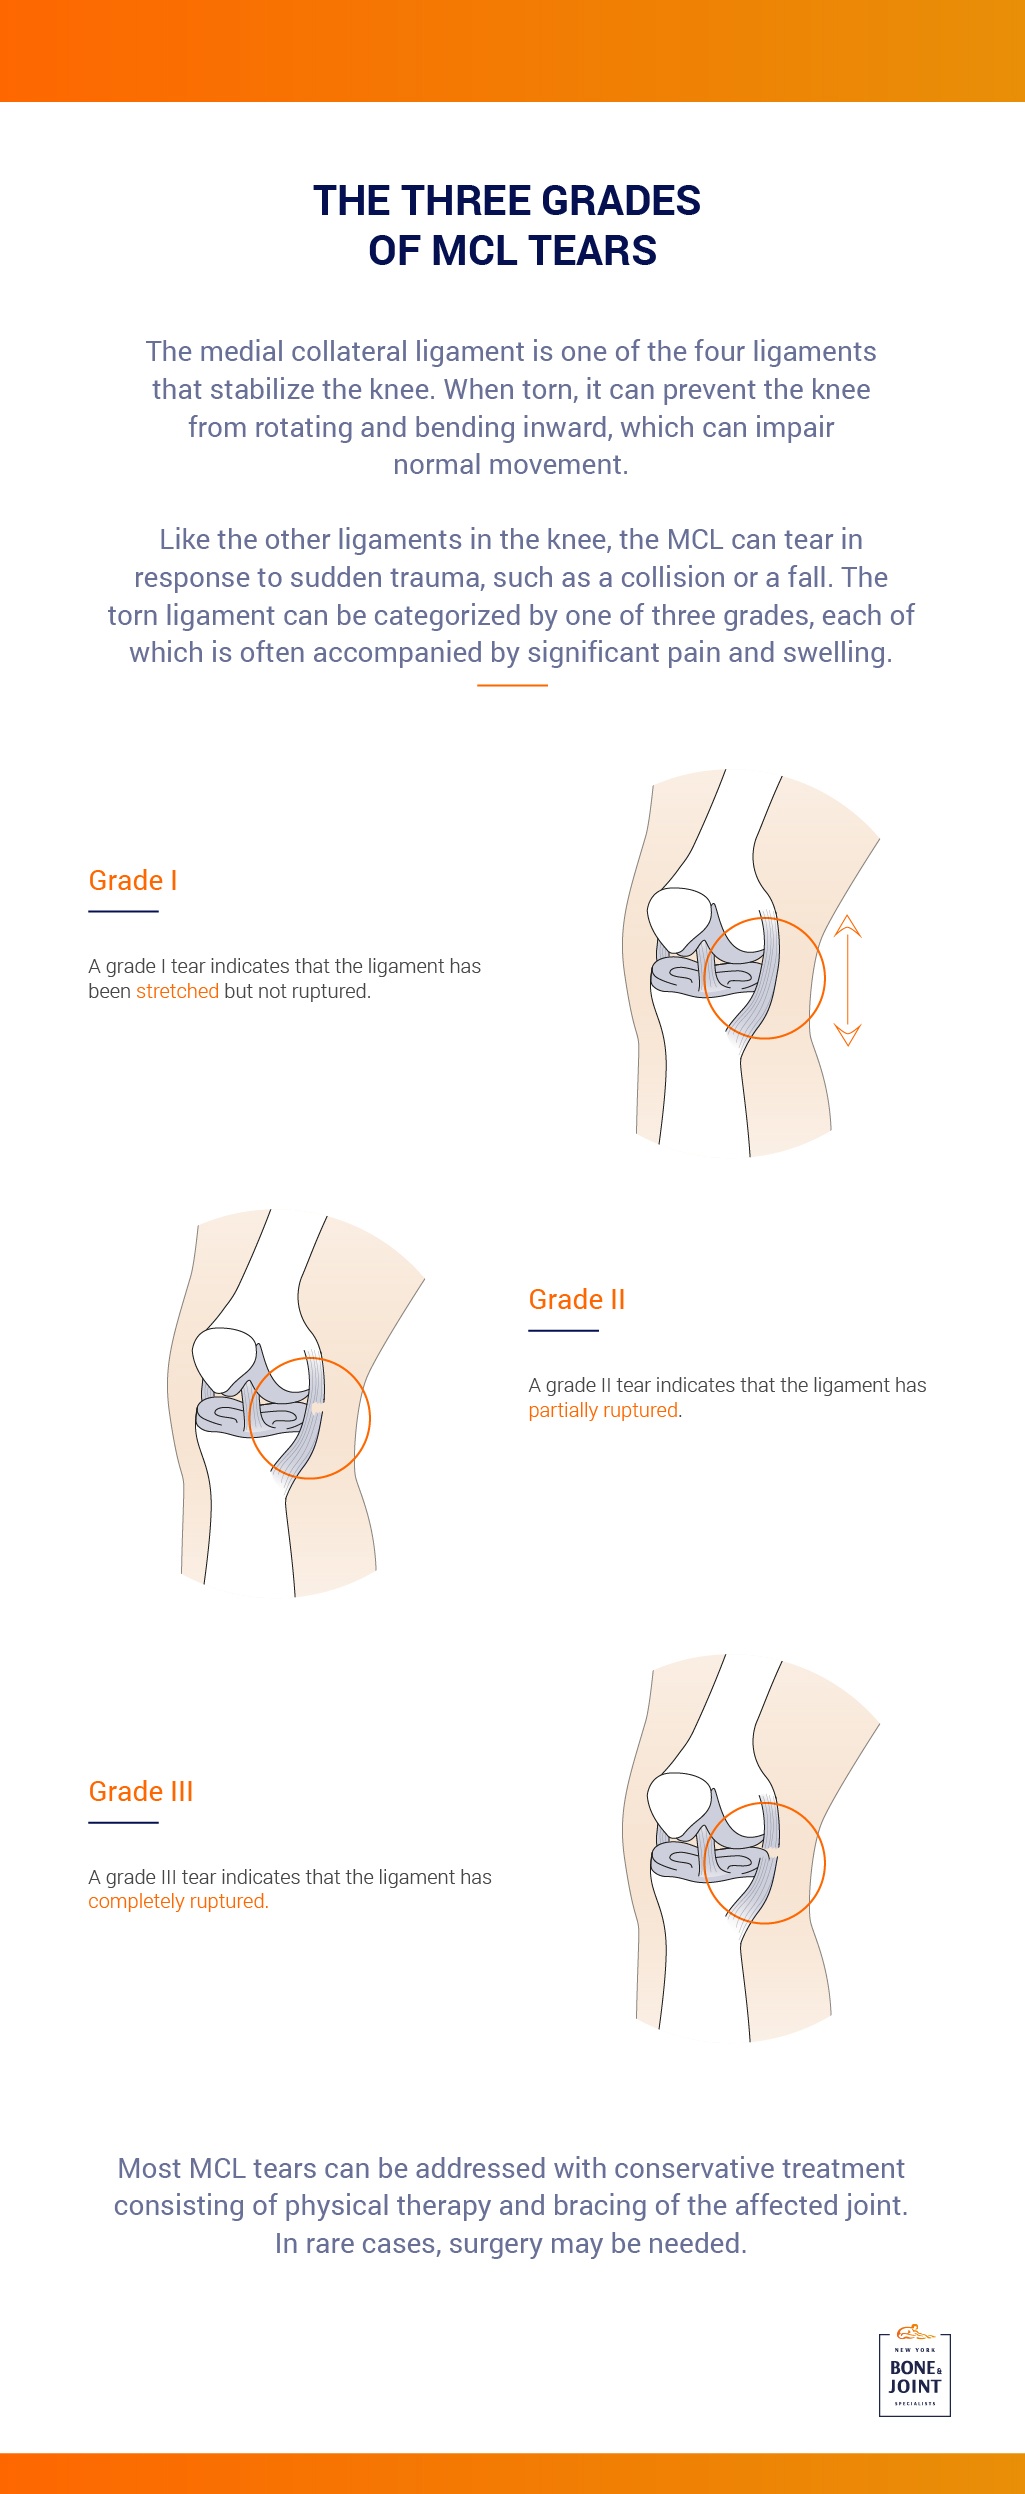 How to diagnose and treat a medial collateral ligament and lateral